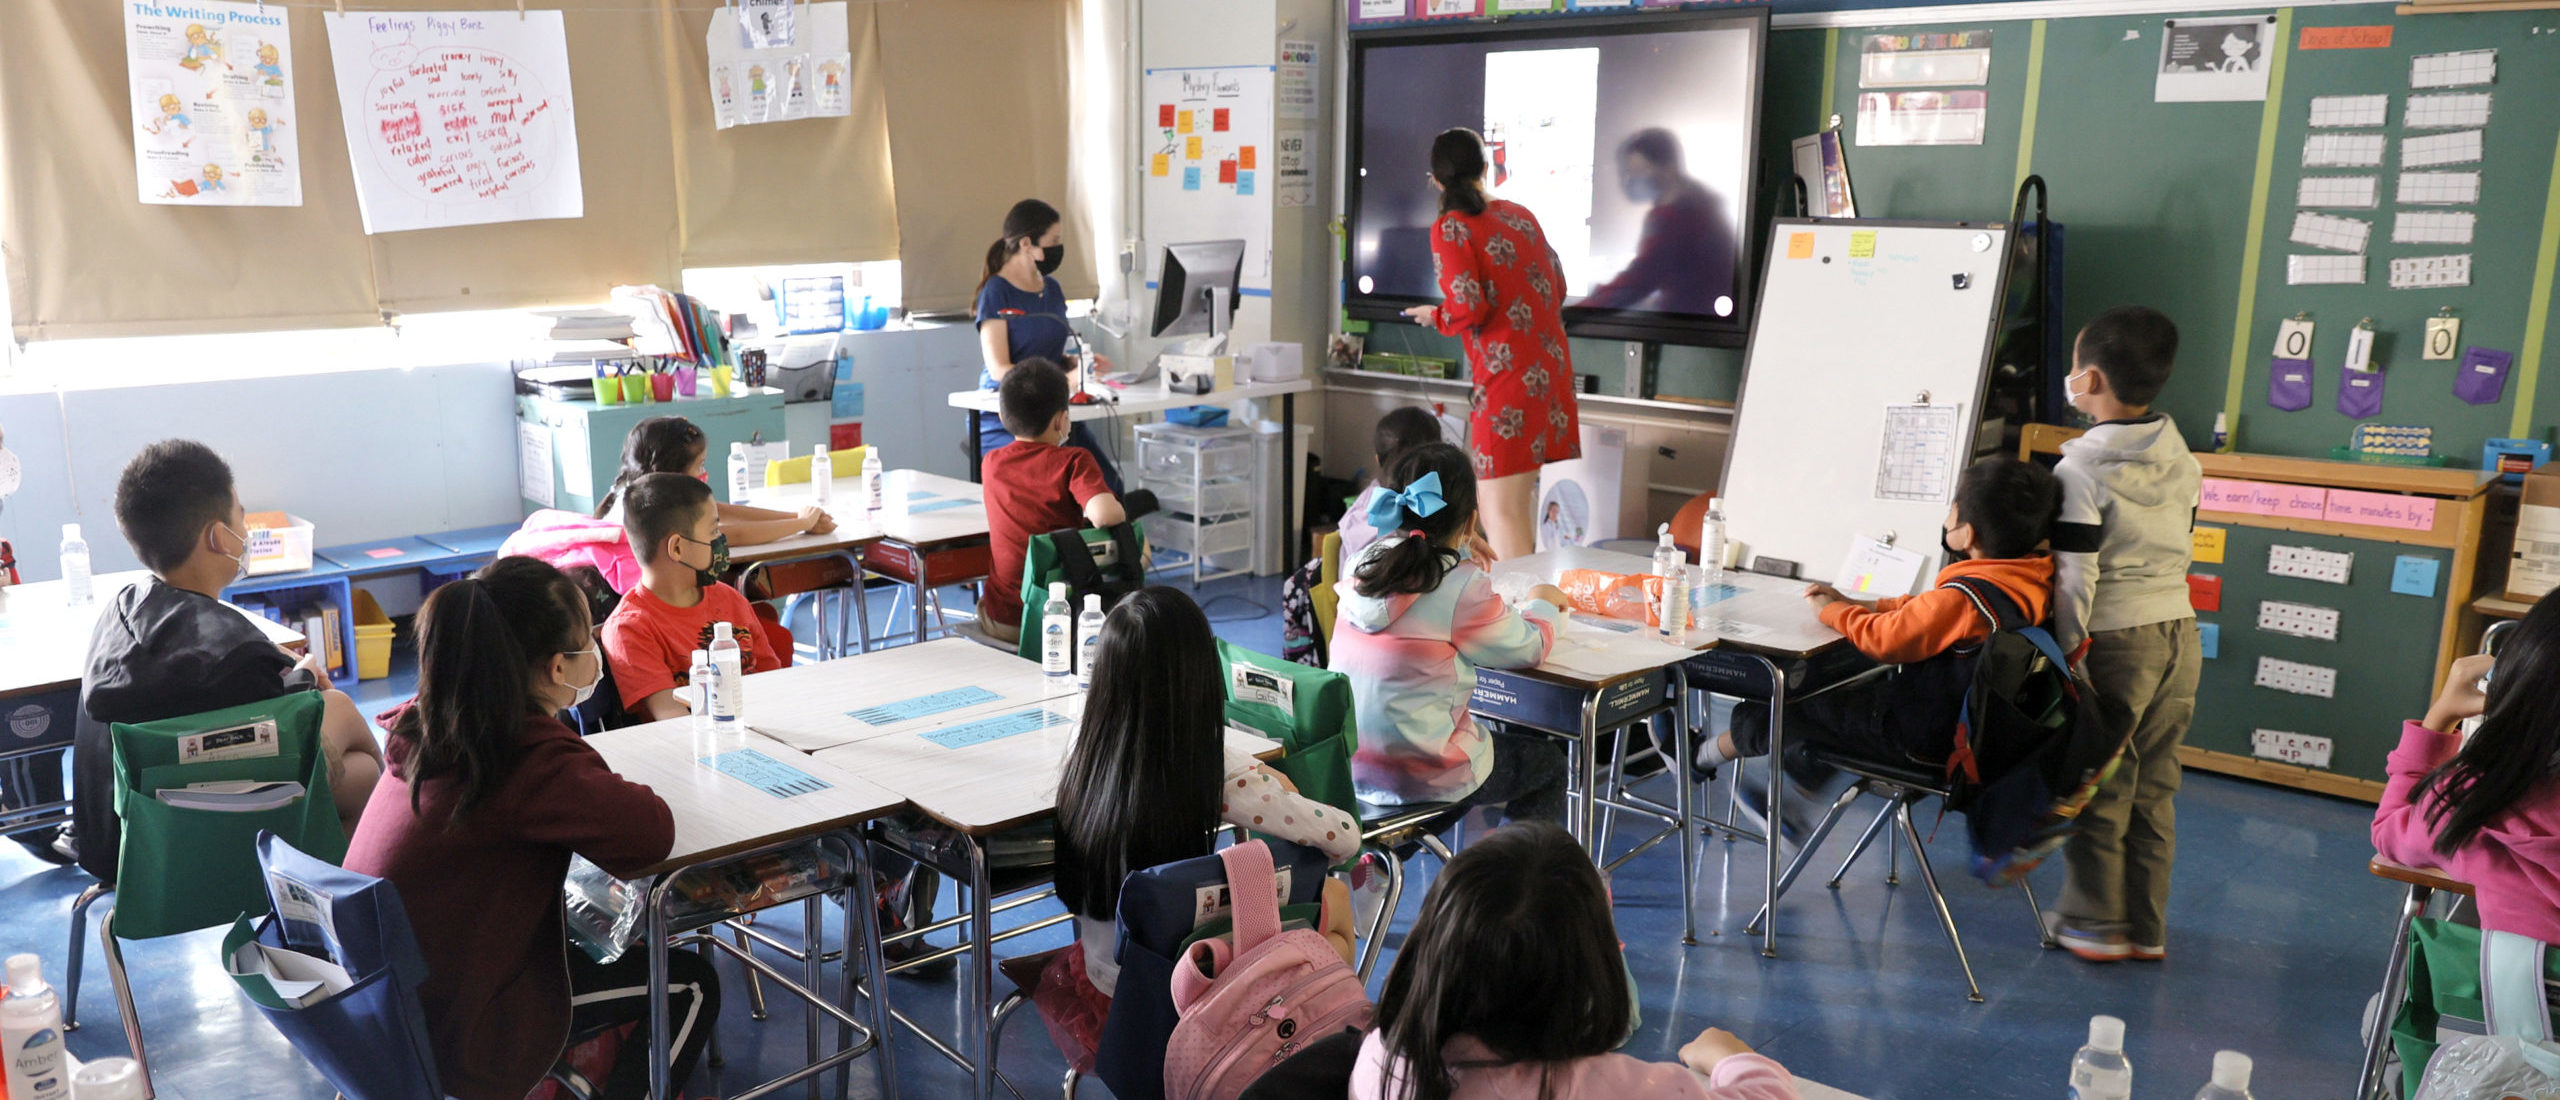 Co-teachers at Yung Wing School P.S. 124 Marisa Wiezel (who is related to the photographer) and Caitlin Kenny give a lesson to their masked students in their classroom on September 27, 2021 in New York City. (Photo by Michael Loccisano/Getty Images)